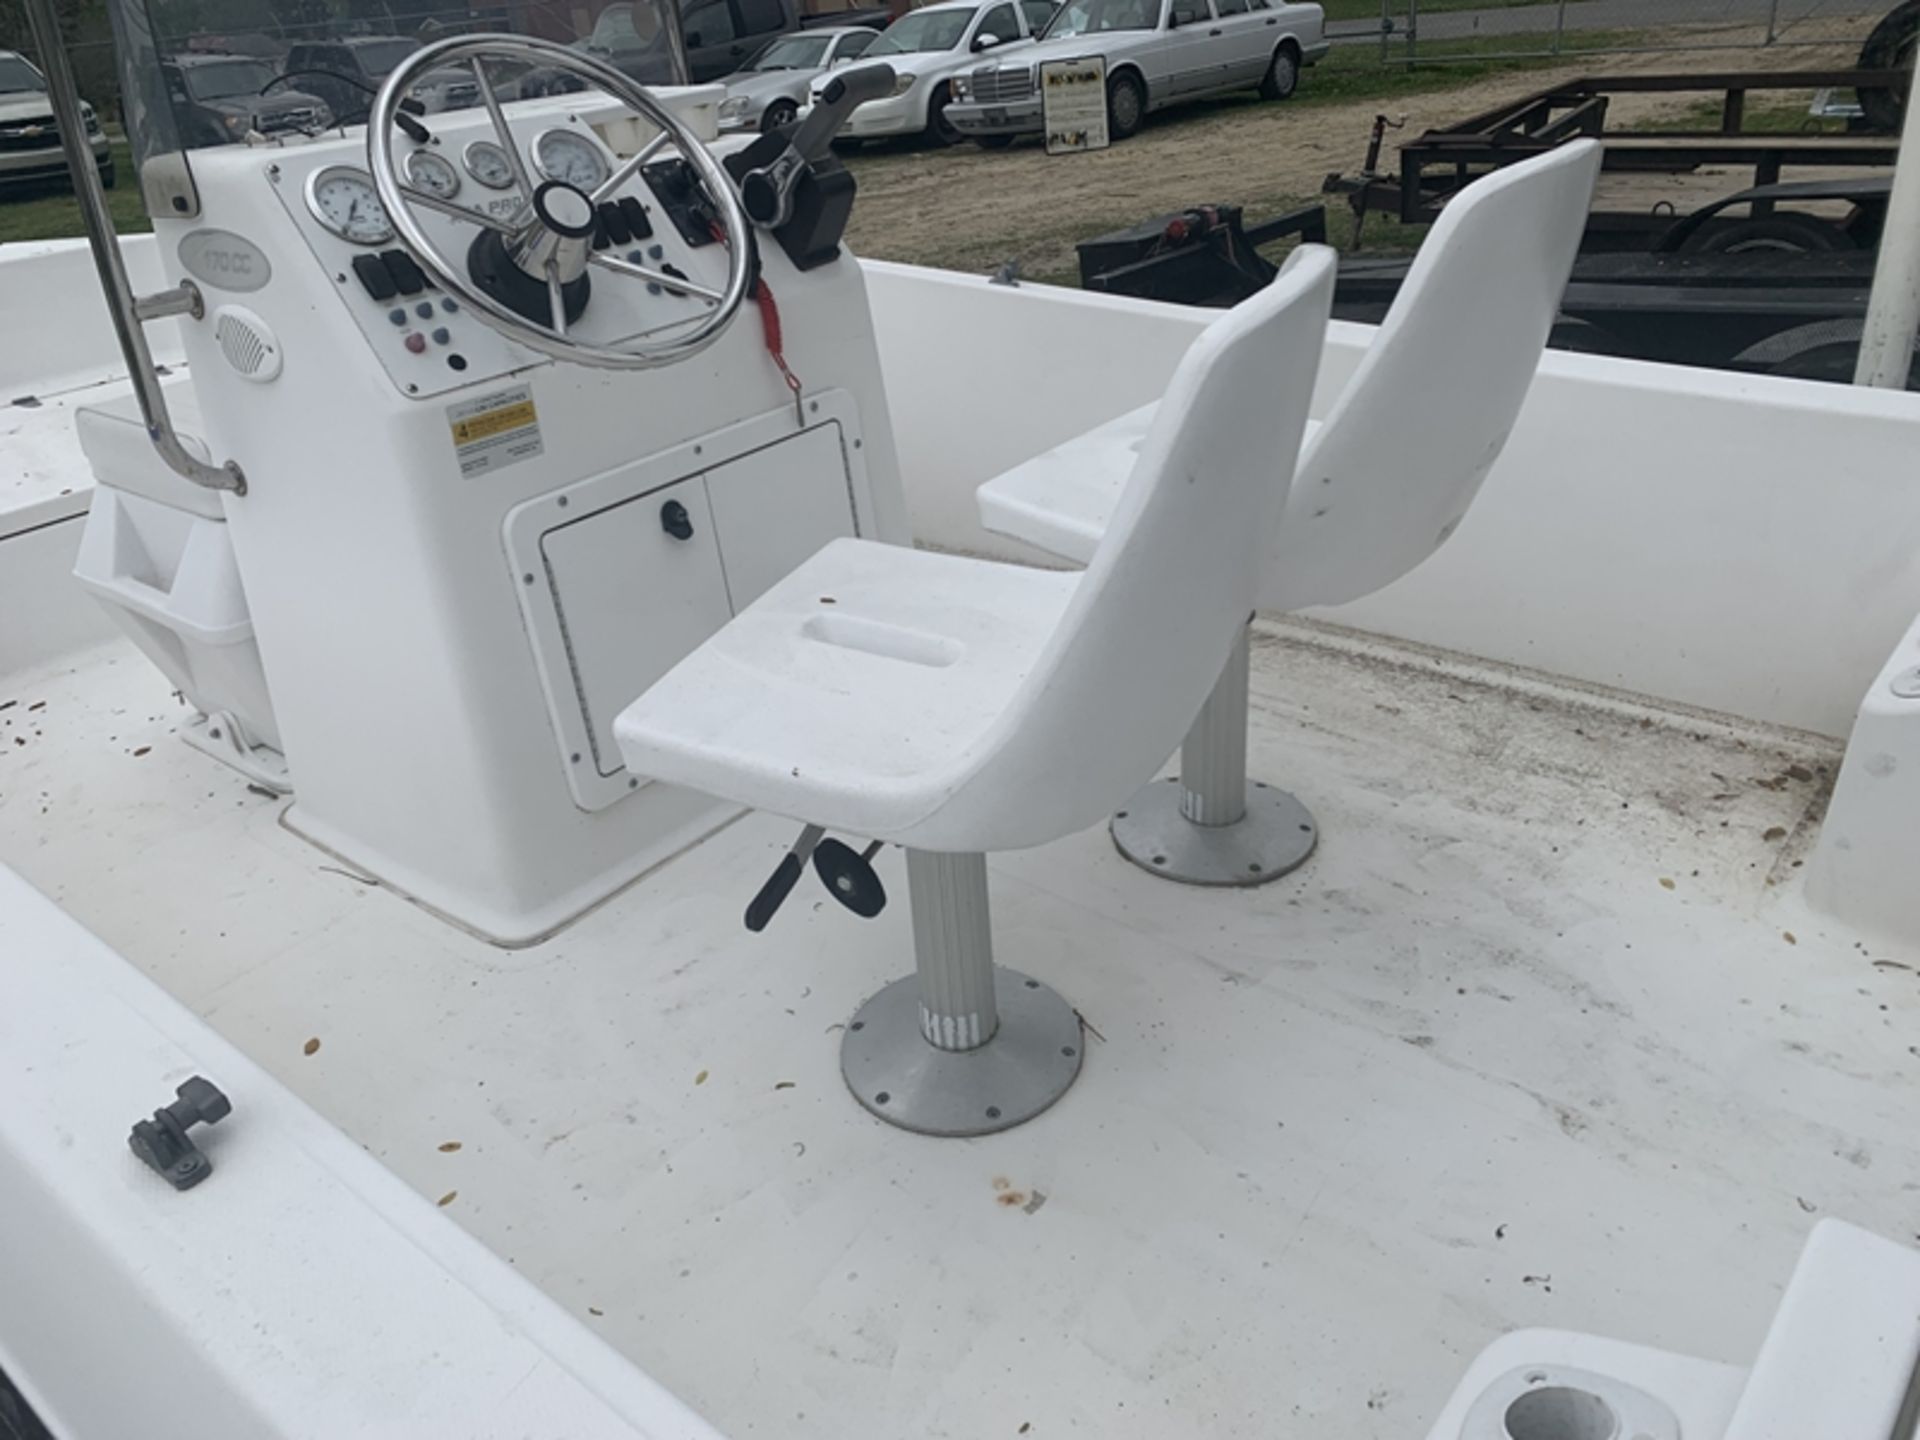 2003 SEA PRO 170 17' fiberglass center console with Yamaha 115 and trailer - HULL ID - PIOLB978K203 - Image 6 of 9